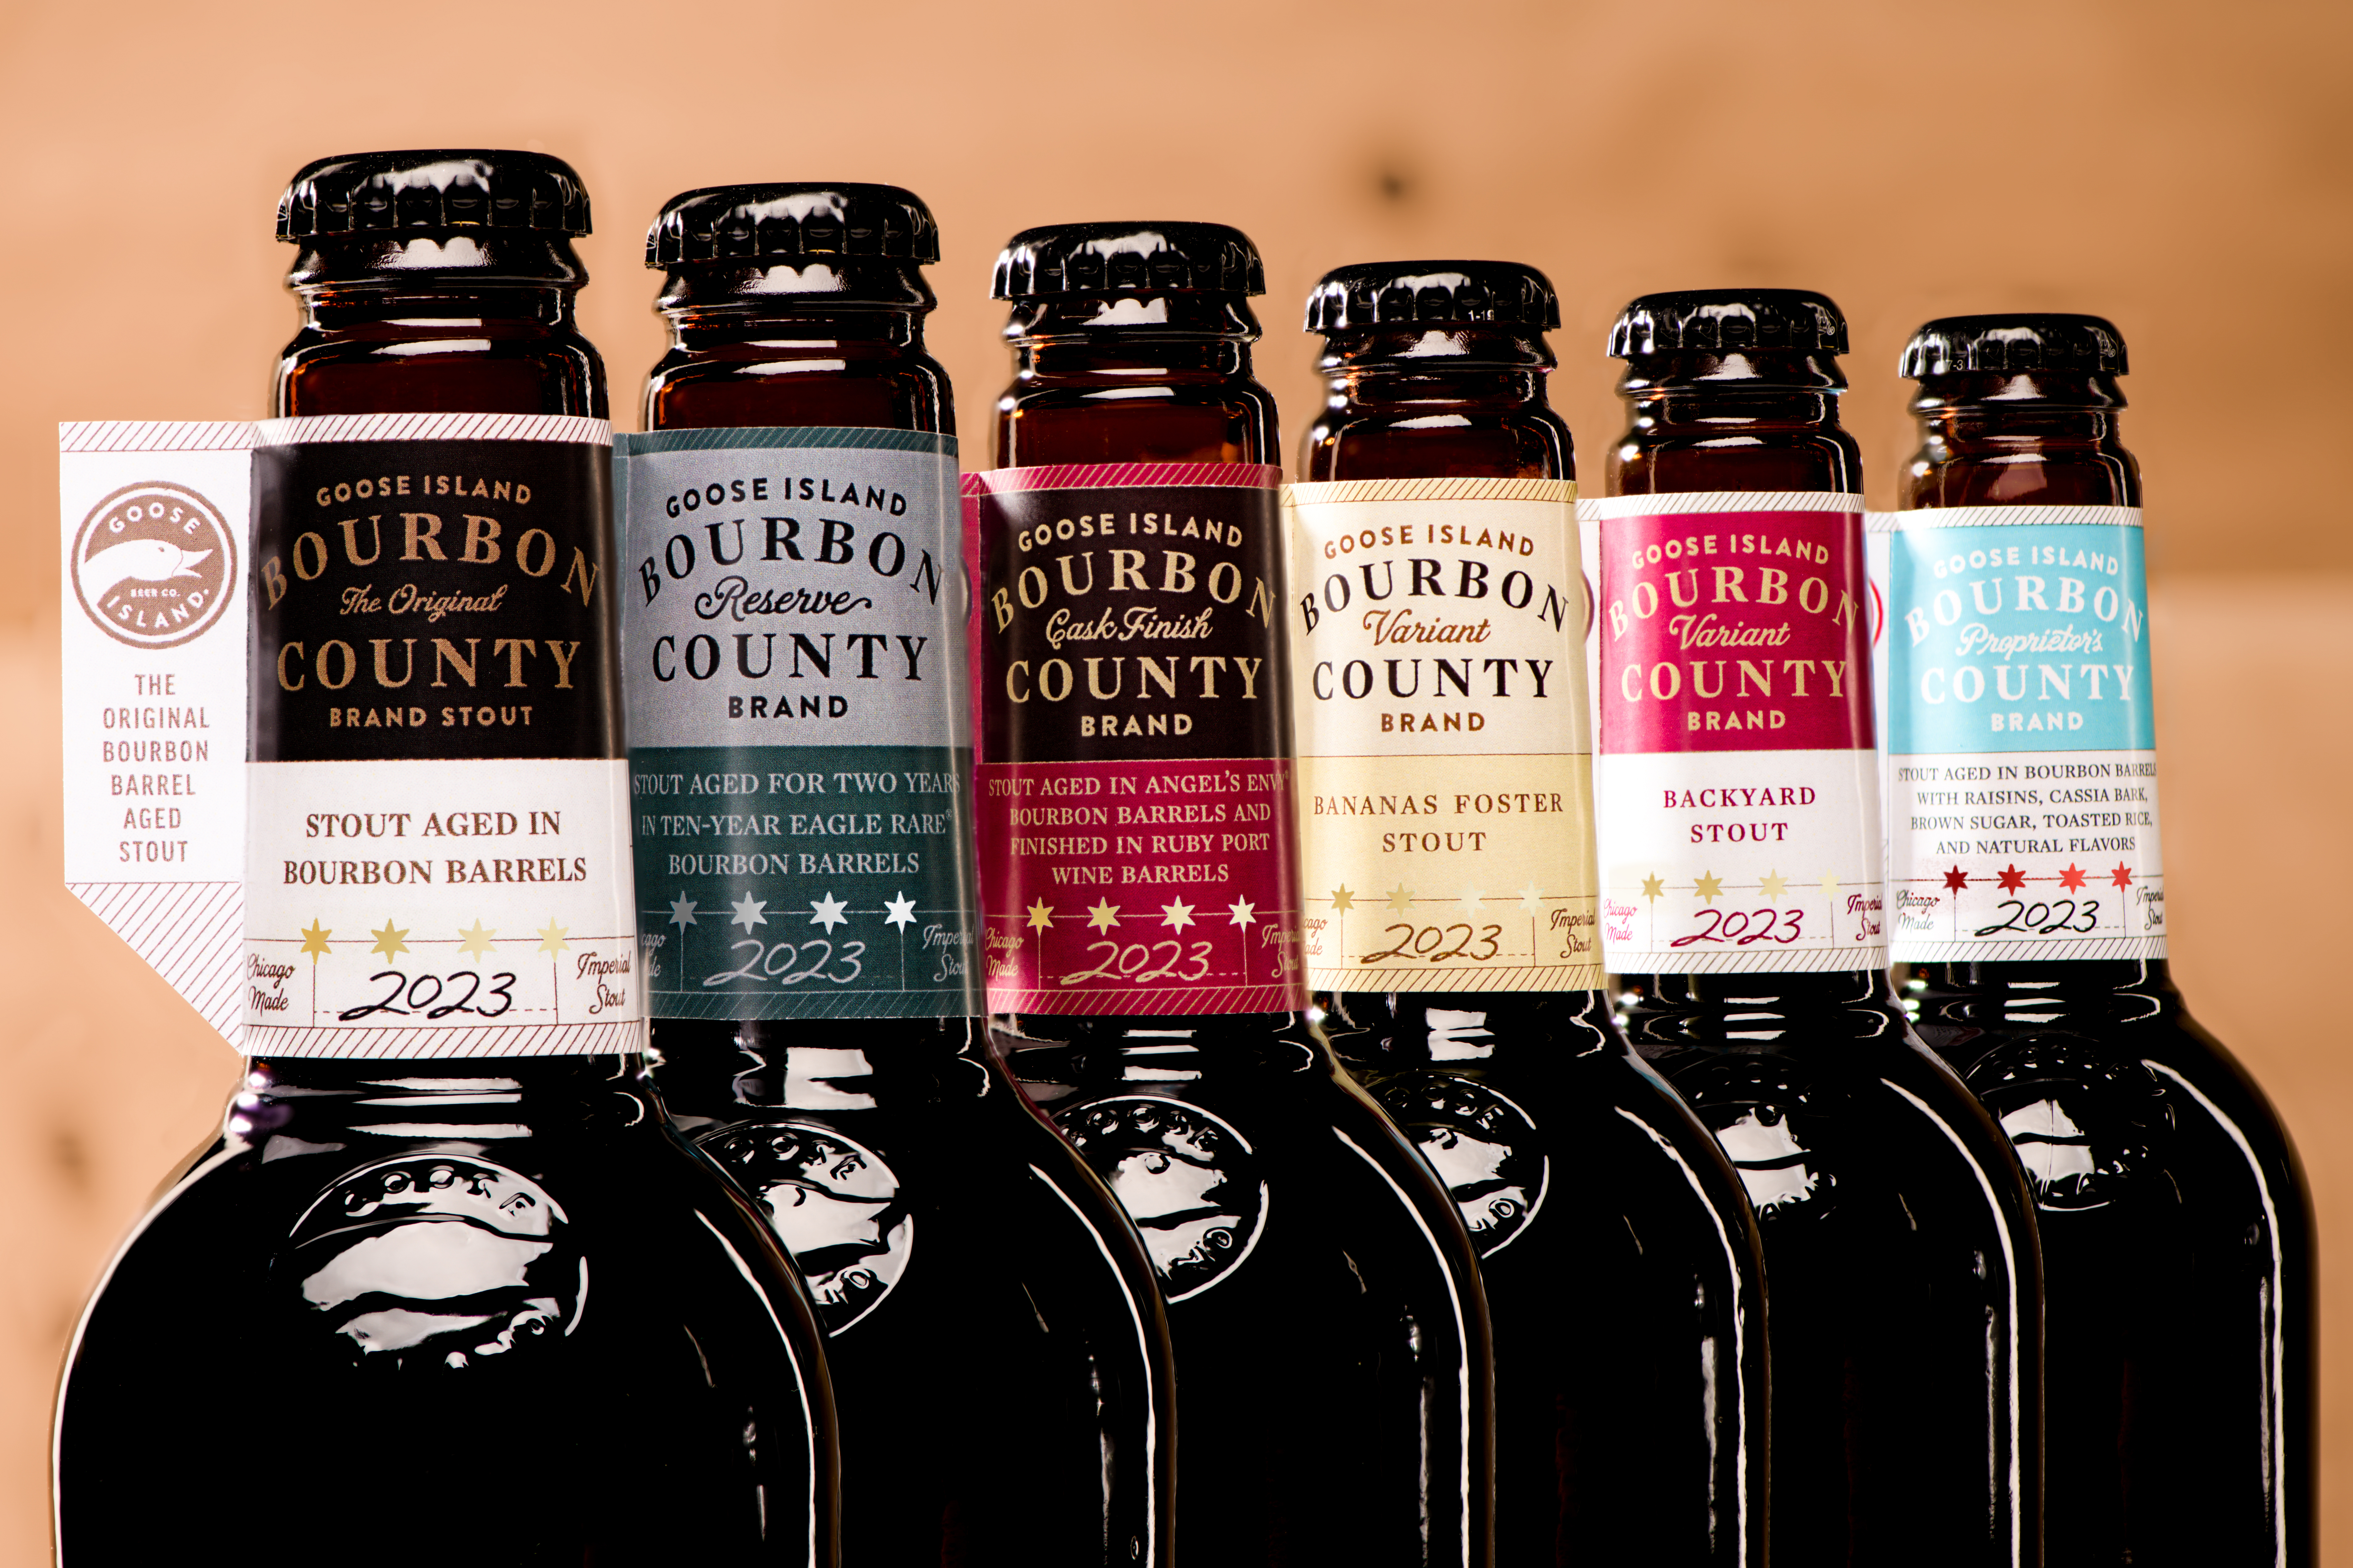 The full lineup of Goose Island’s Bourbon County brand stouts.